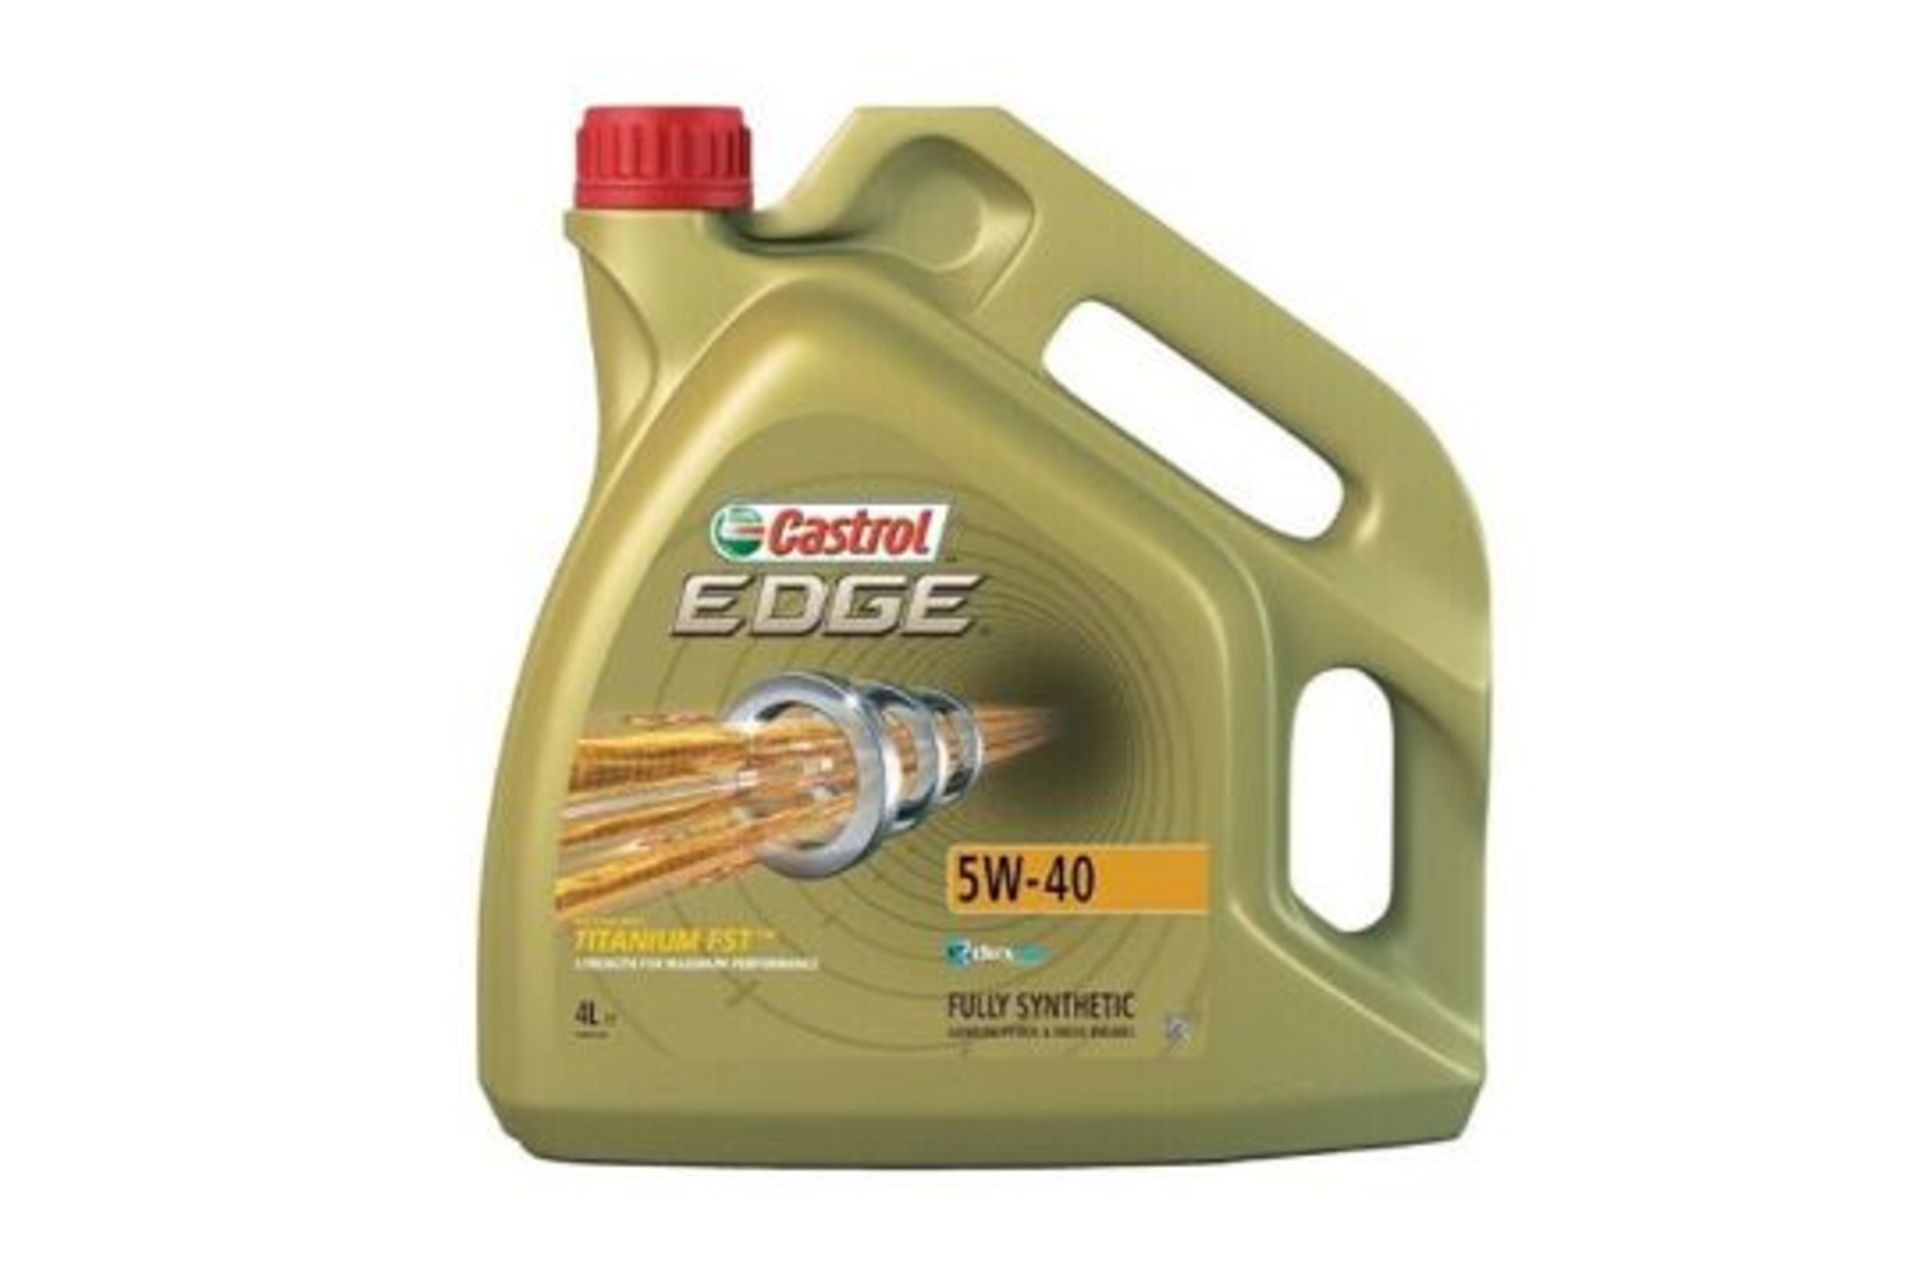 PALLET TO CONTAIN 24 X NEW SEALED 4L TUBS OF CASTROL EDGE 5W-40 ADVANCED FULLY SYNTHETIC OIL FOR